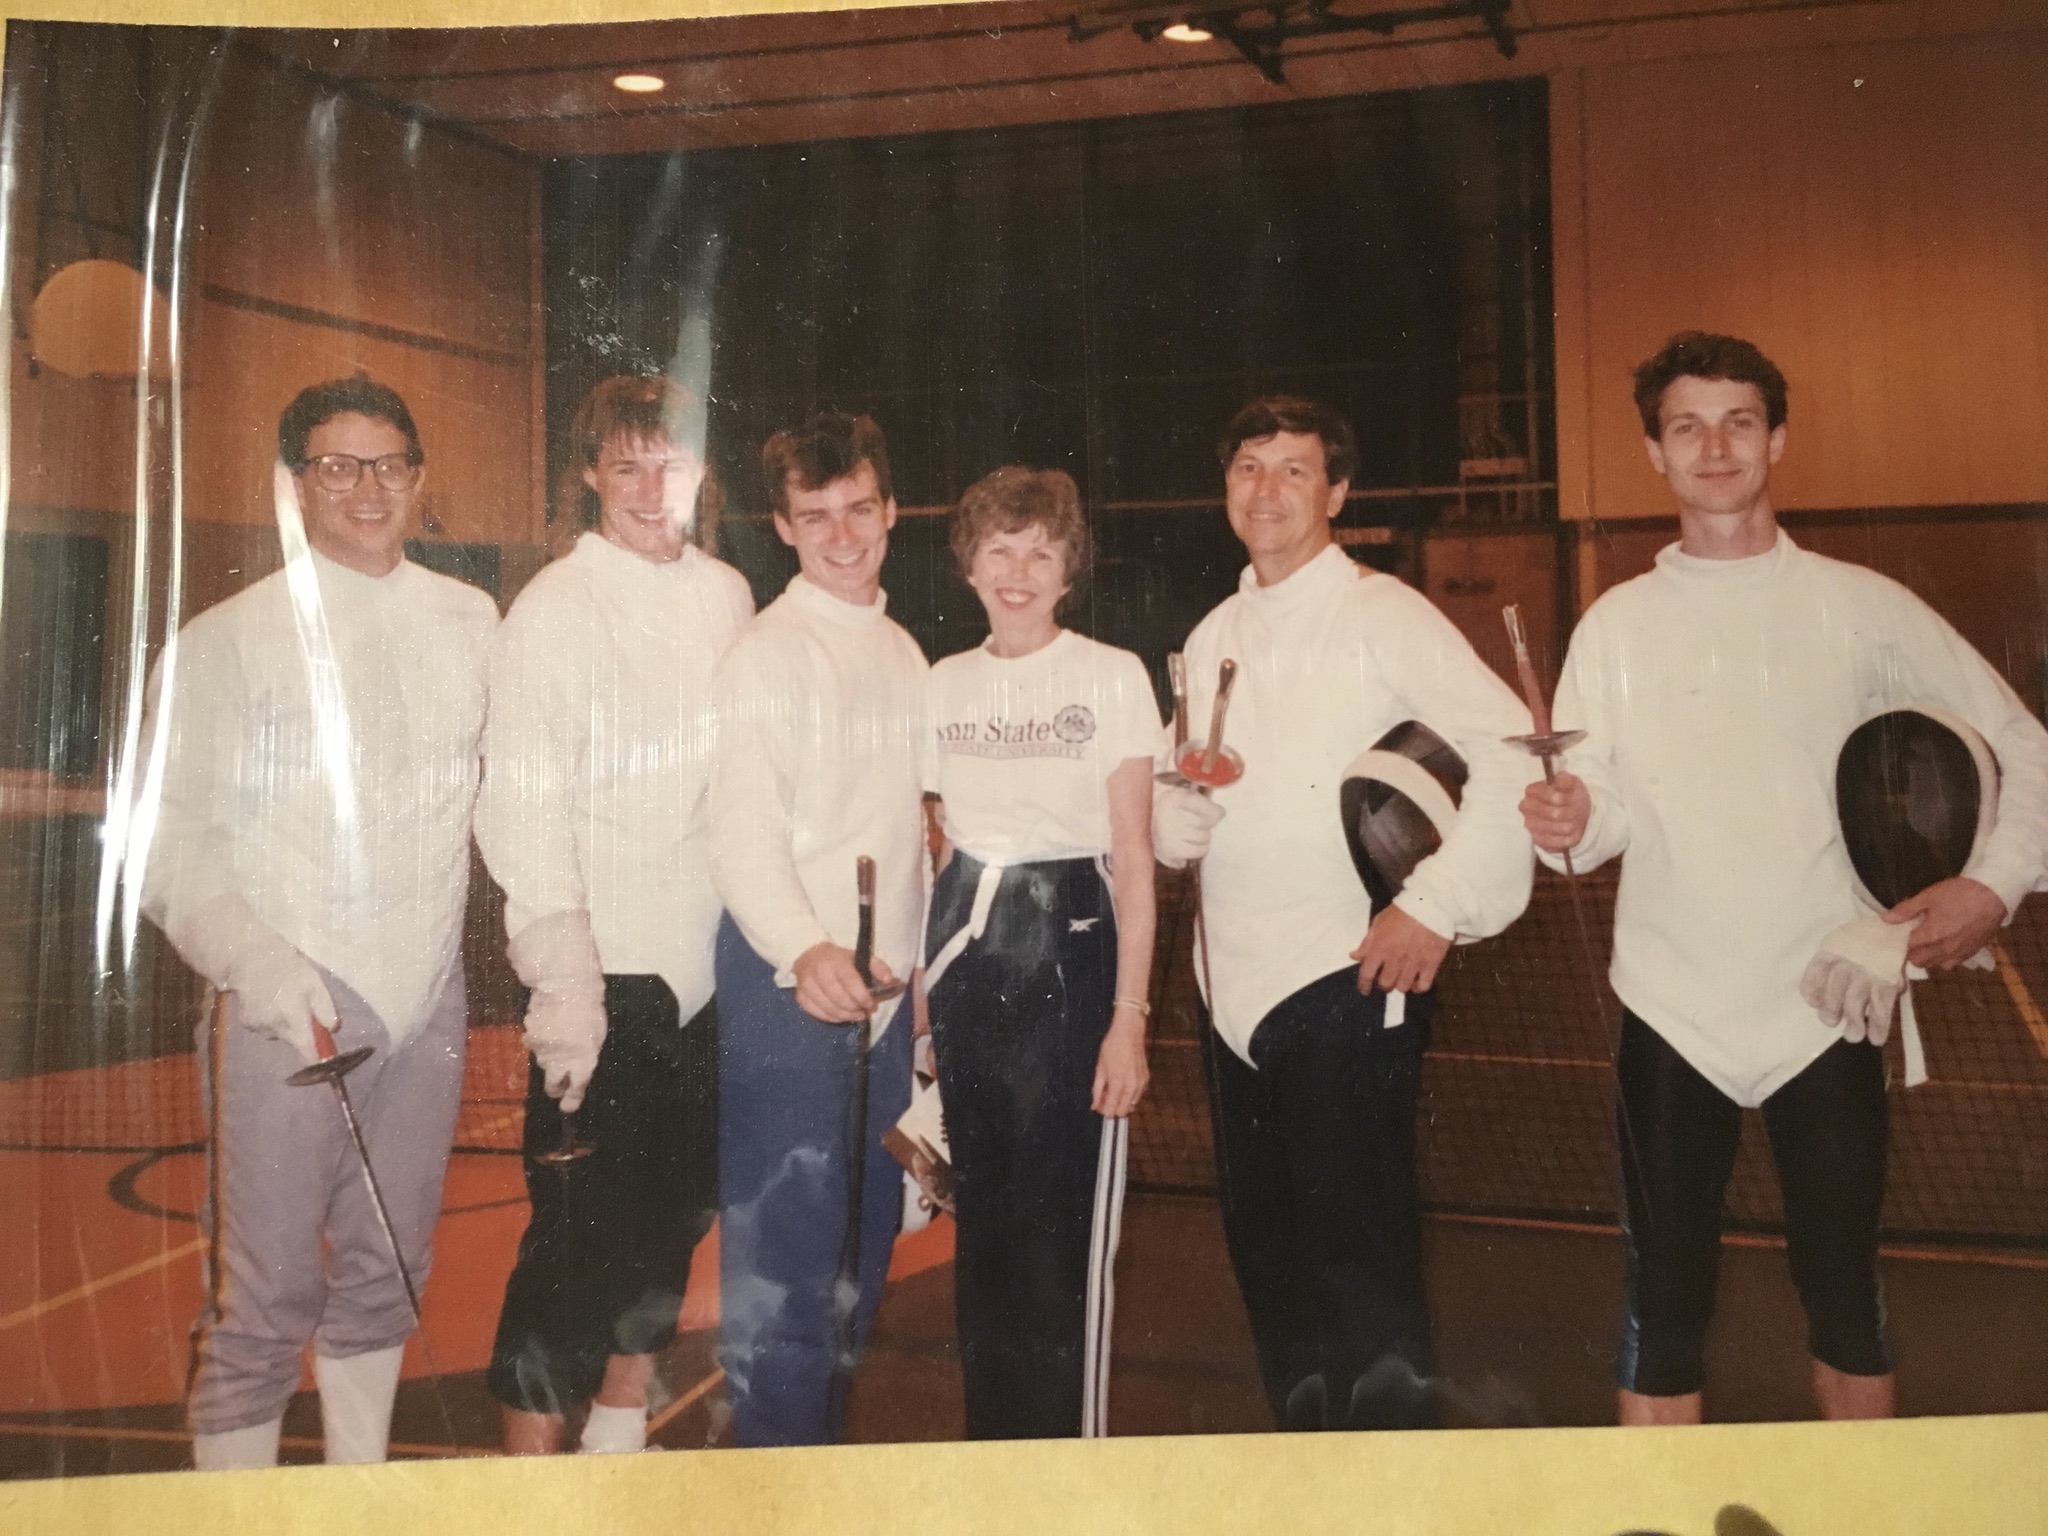 Allan Sturm takes First Place in his first fencing competition